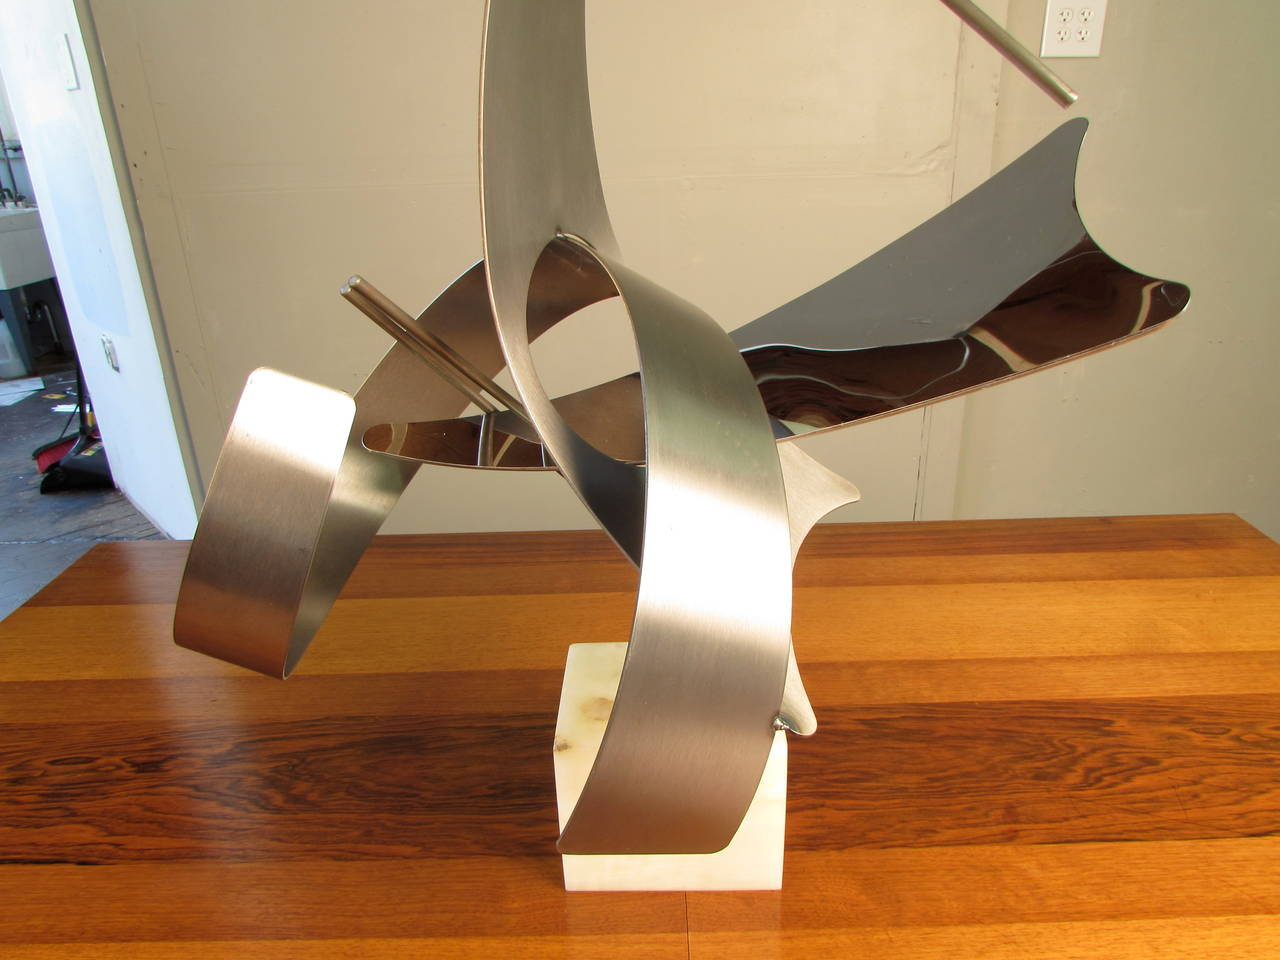 Brushed Large-Scale Abstract Modern Stainless Steel Table Sculpture by Curtis Jere, 1979